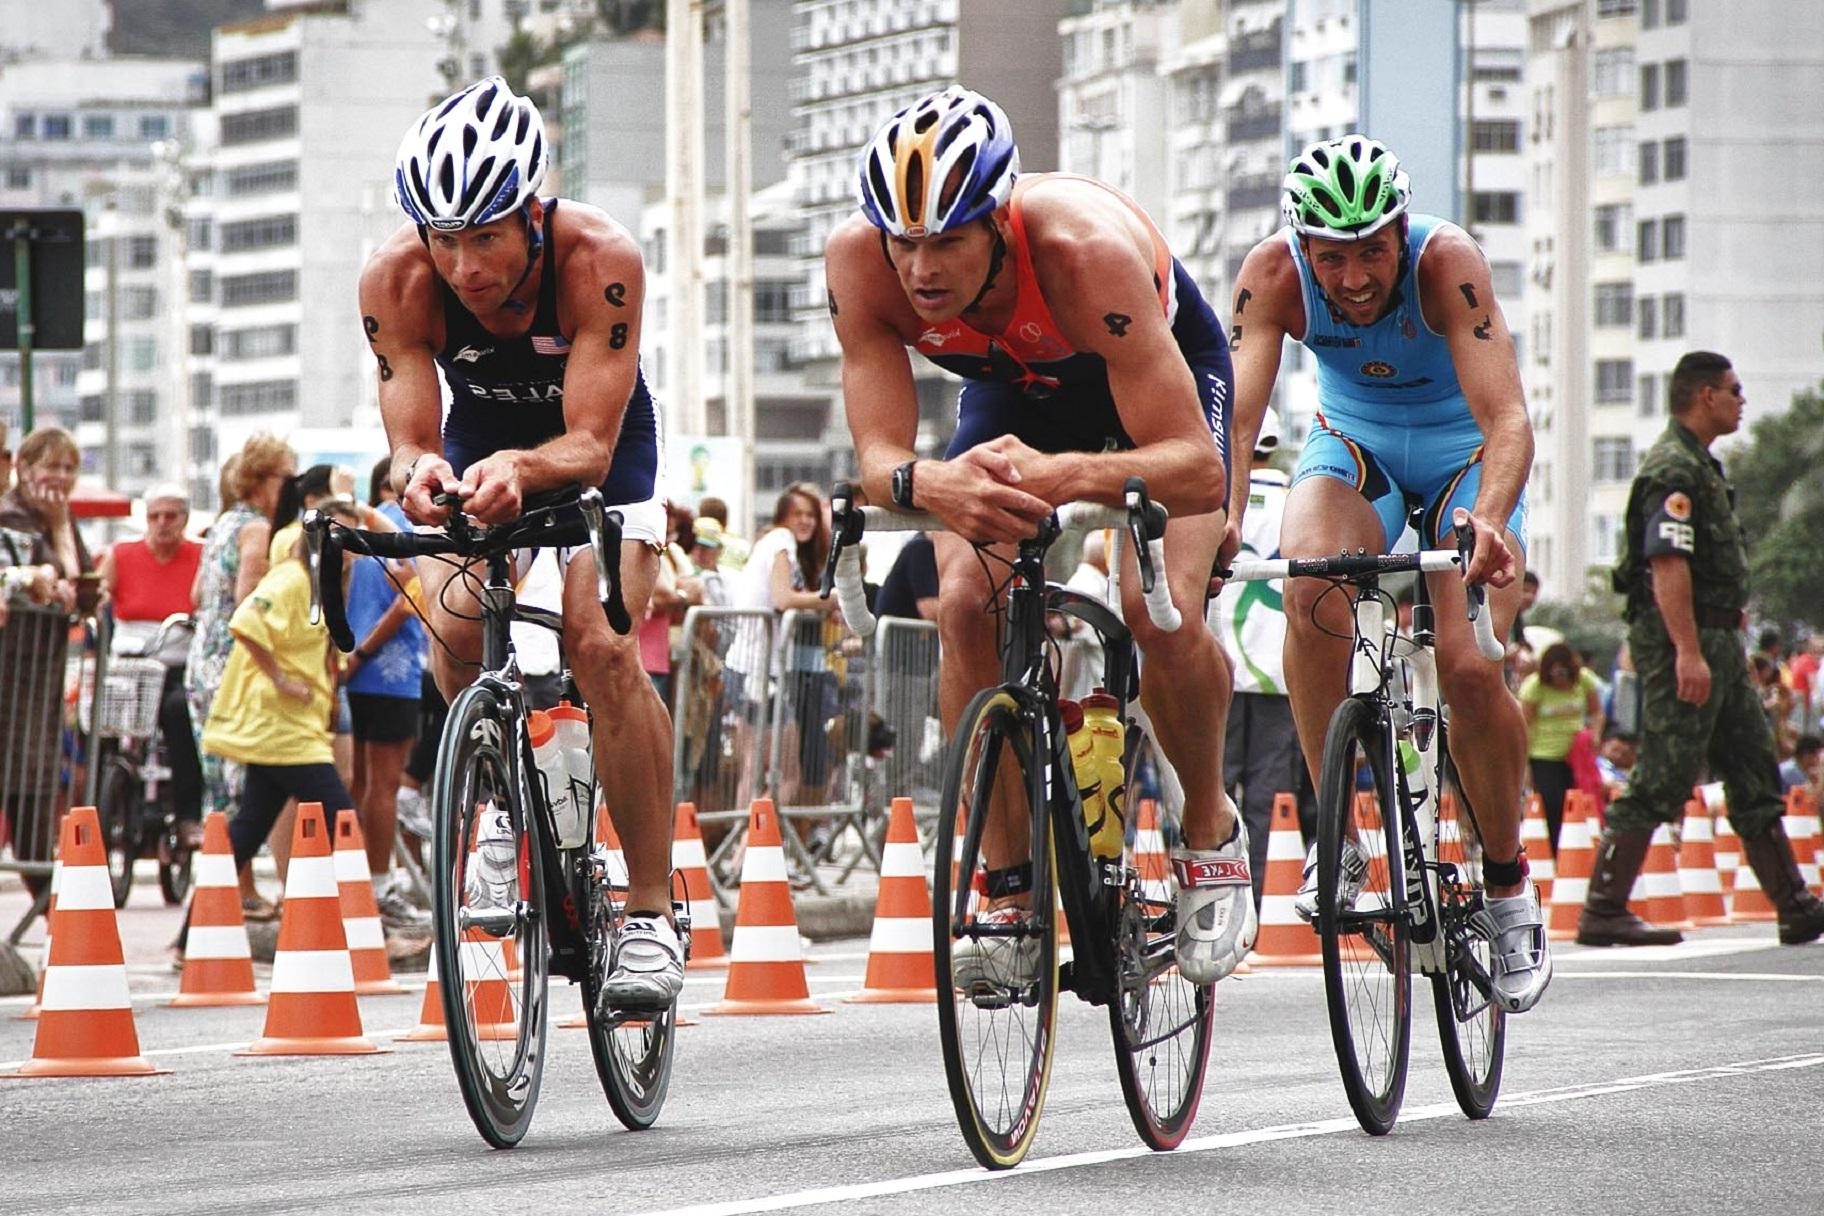 Free picture: race, competition, marathon, wheel, people, cyclist ...